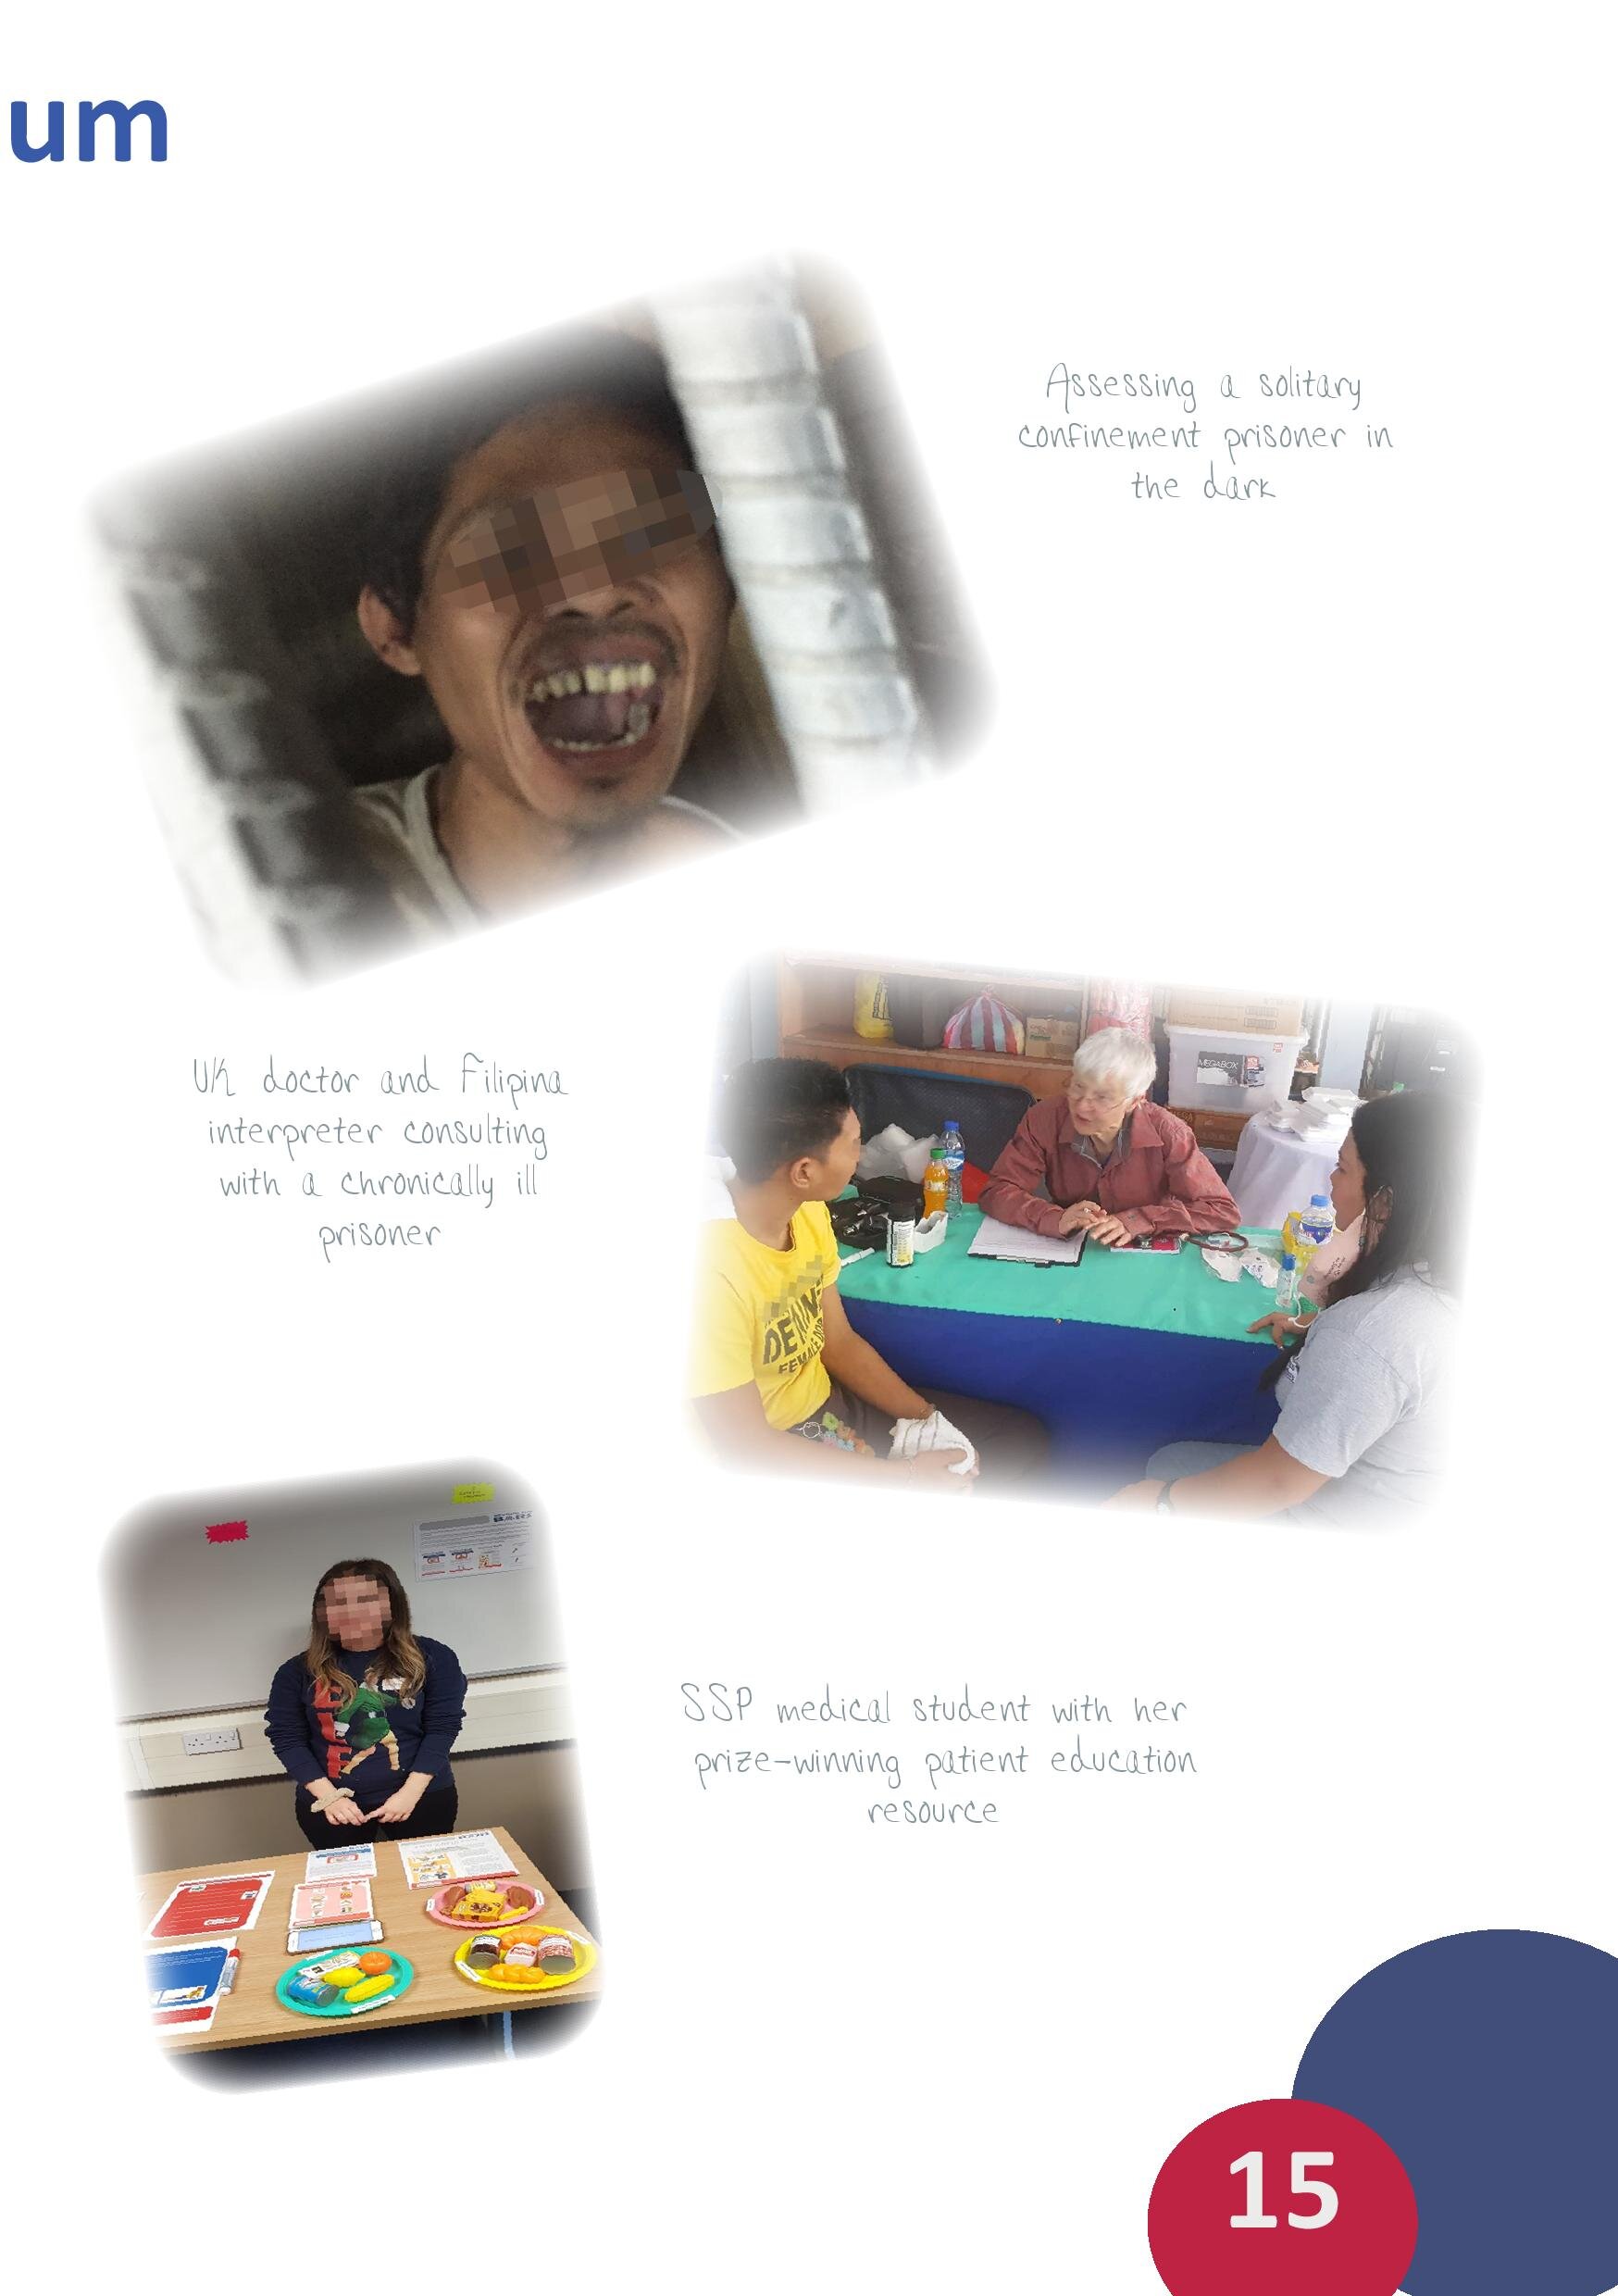 Now we are 8 - Integritas  2012-2020 Early Years Report-page-015.jpg